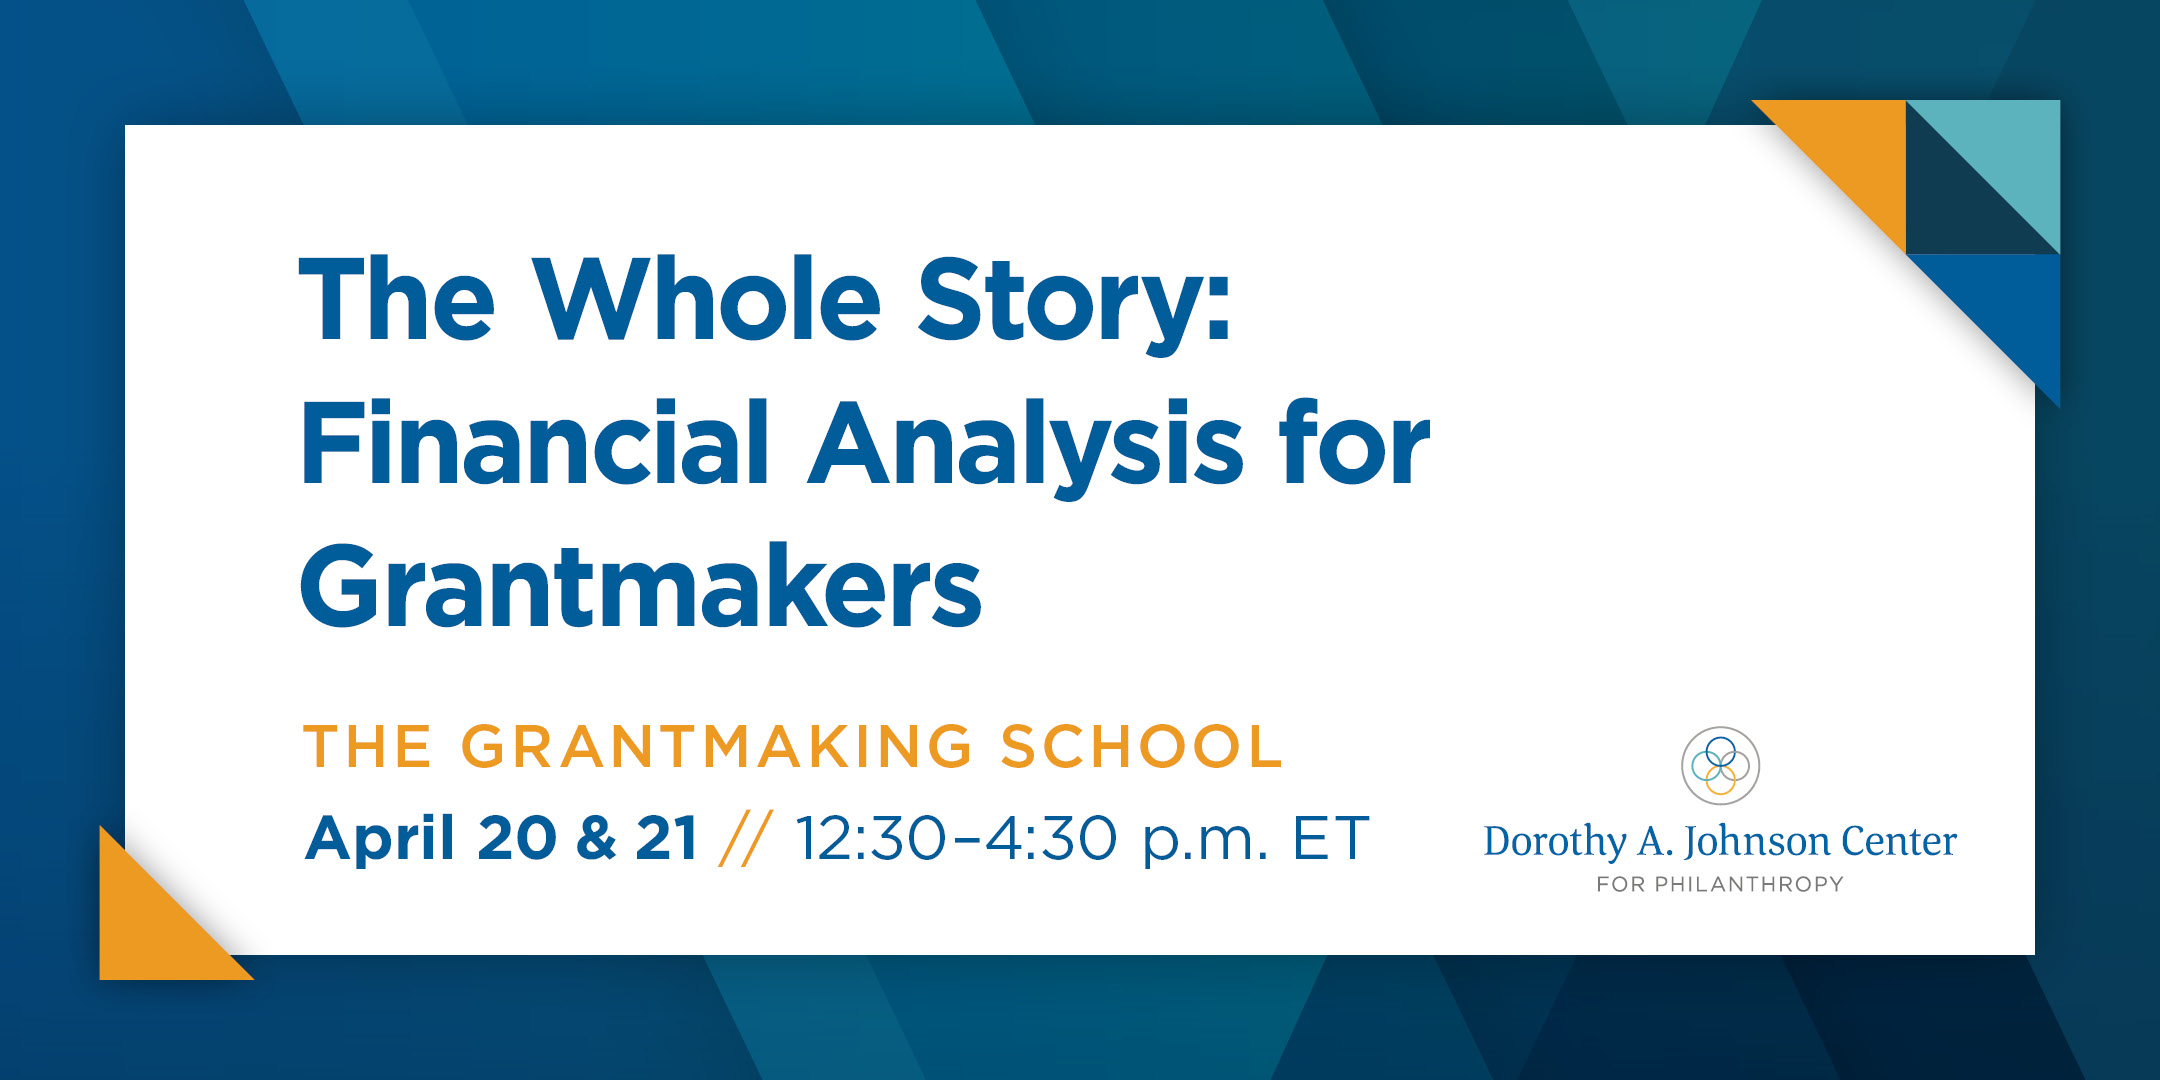 The Whole Story: Financial Analysis for Grantmakers